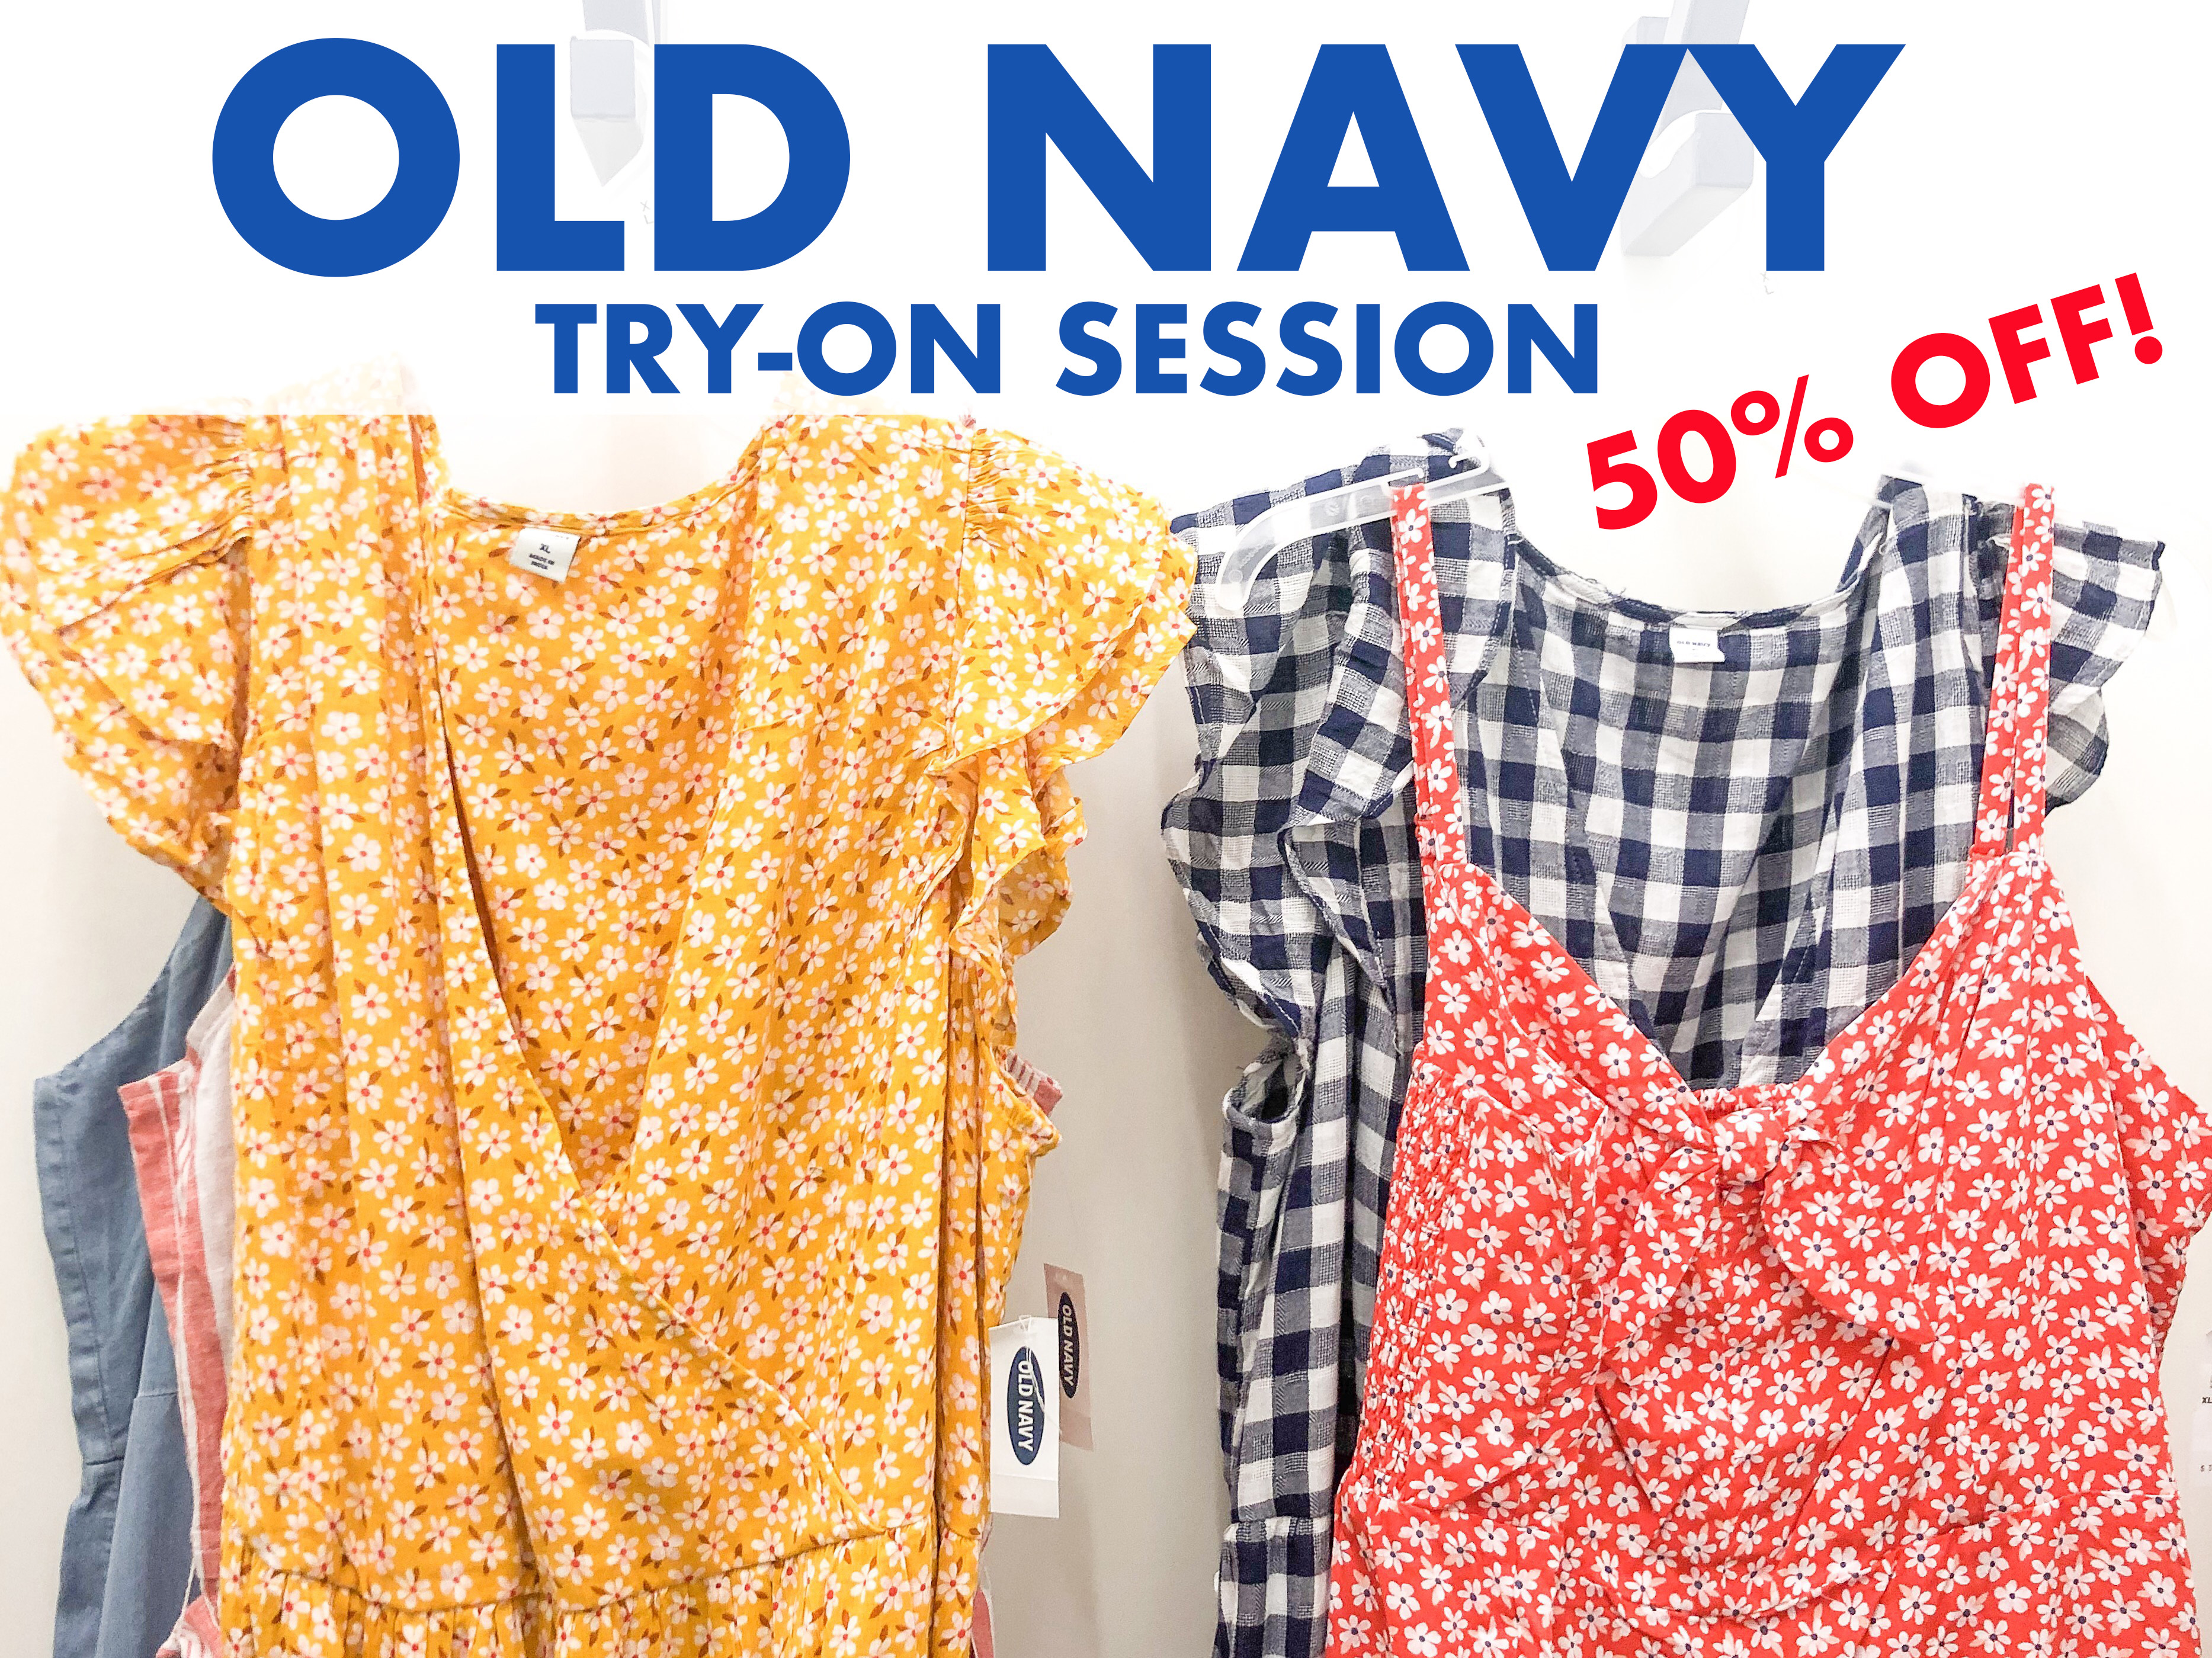 Old Navy Try-On Session: 50% off Memorial Day Sale!